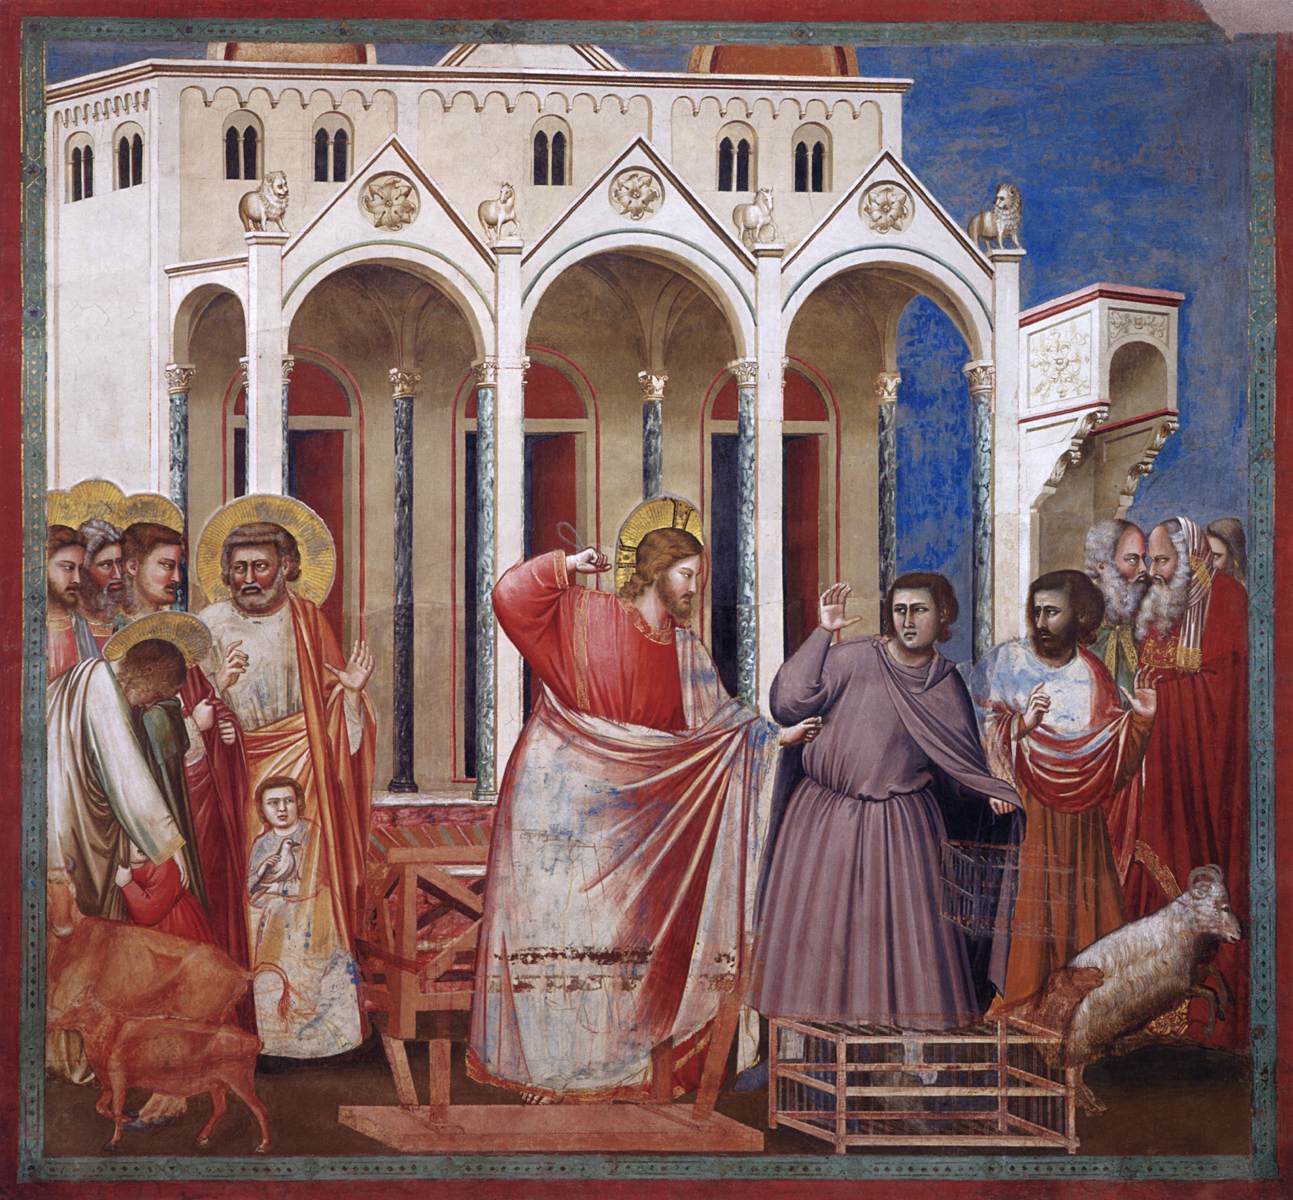 No 27 Scenes from the Life of Christ: 11 Expulsion of the Money Changers from the Temple